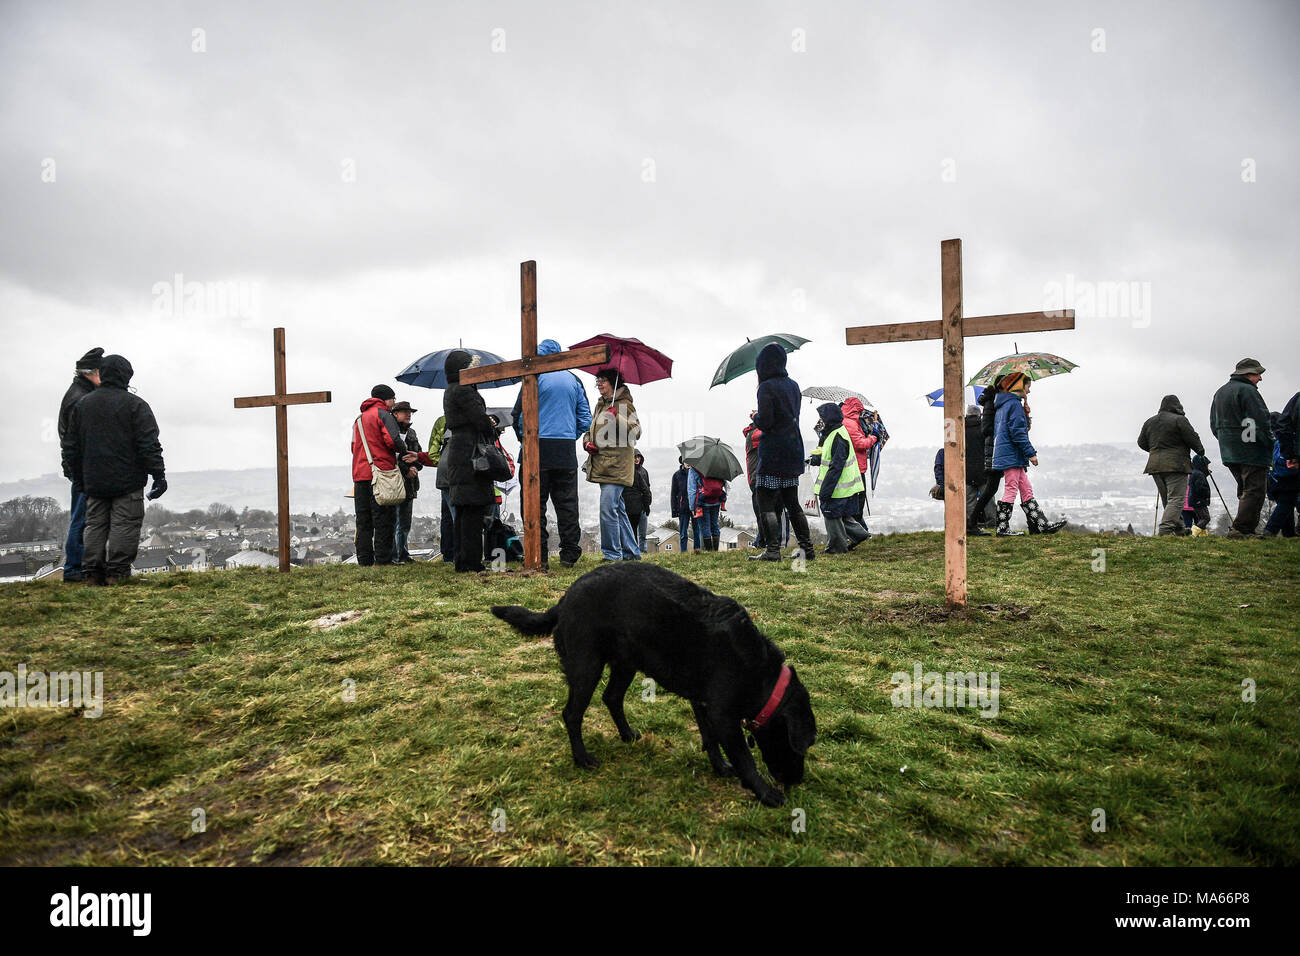 Three wooden crosses are placed on top of Roundhill in Bath, Wiltshire, where several Christian Church congregations attend a hill-top service after taking part in the Walk of Witness to imitate the journey that Jesus took carrying his cross through the streets of Jerusalem on Good Friday. Stock Photo